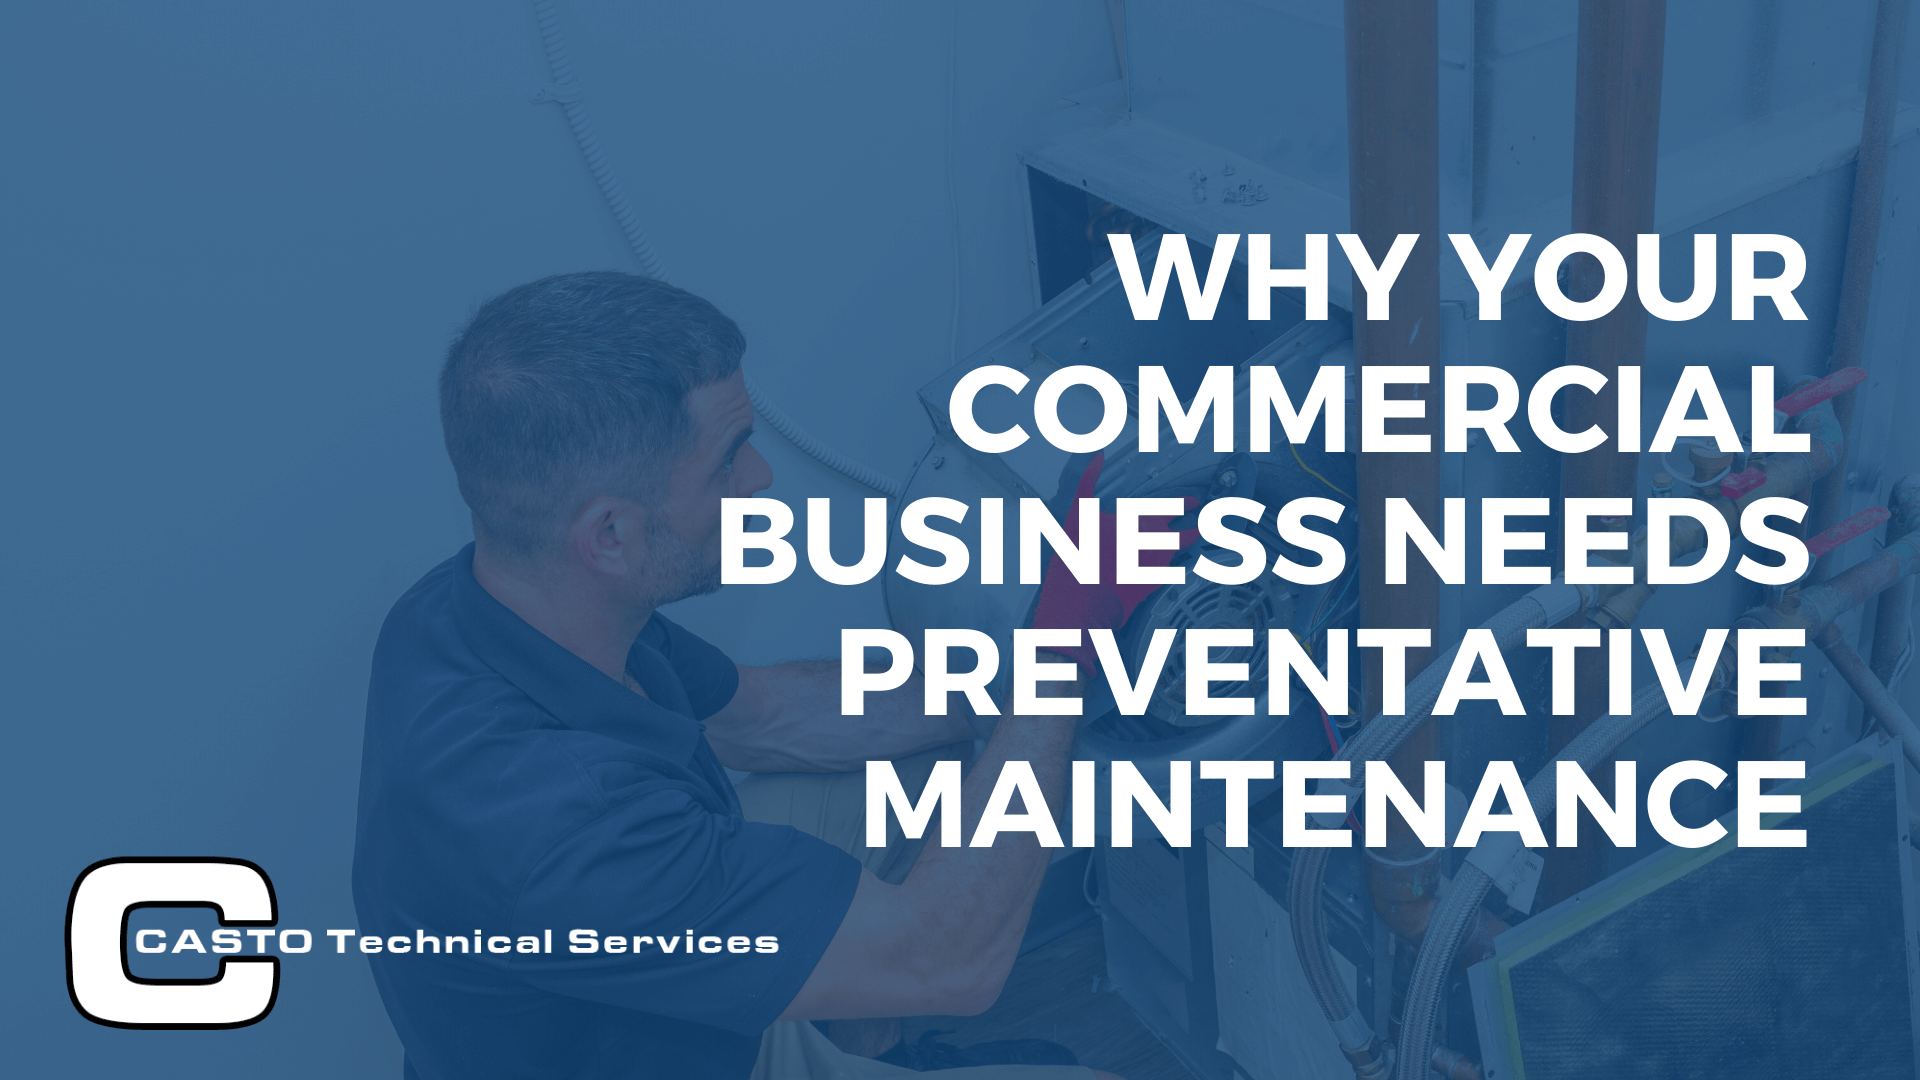 Why Your Commercial Business Needs Preventative Maintenance